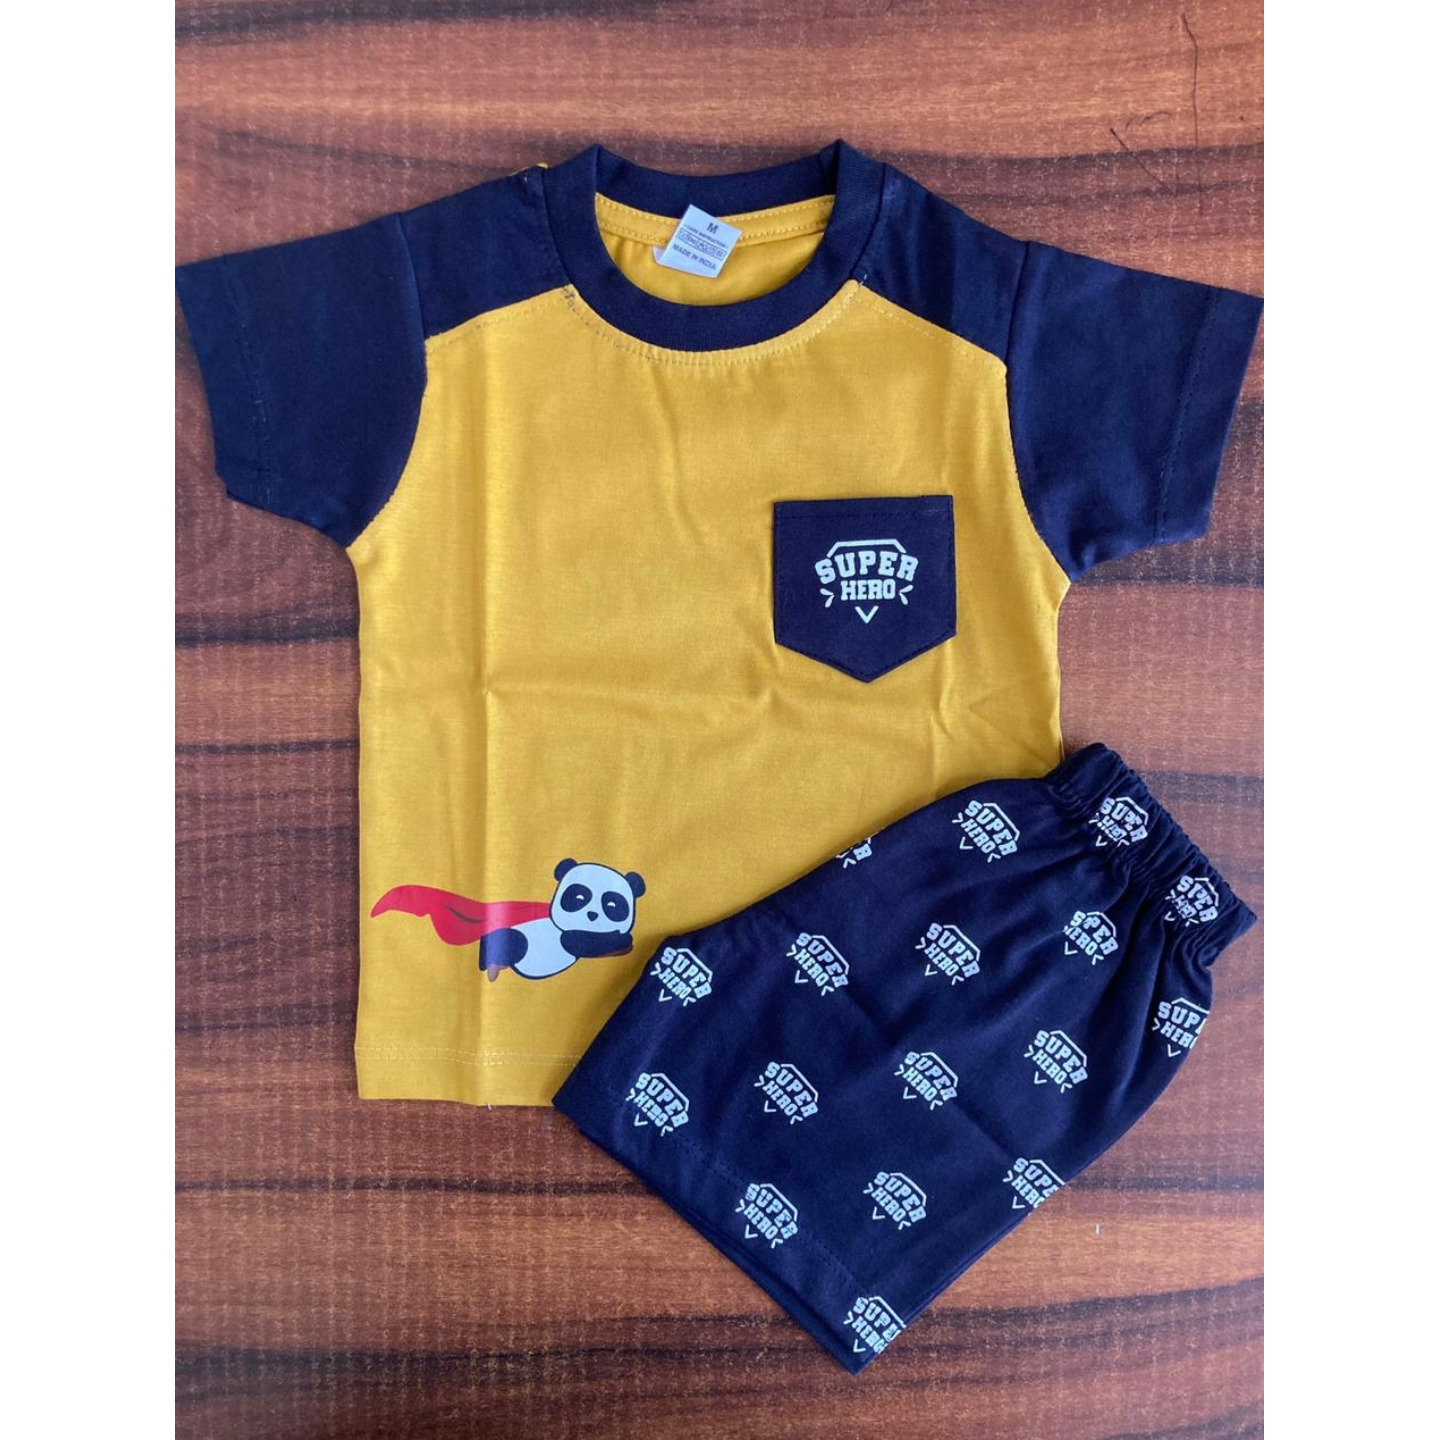 Little Mee Brand Nikar Set Rs 315 Only Made In India Medium Size 6 to 12 Months